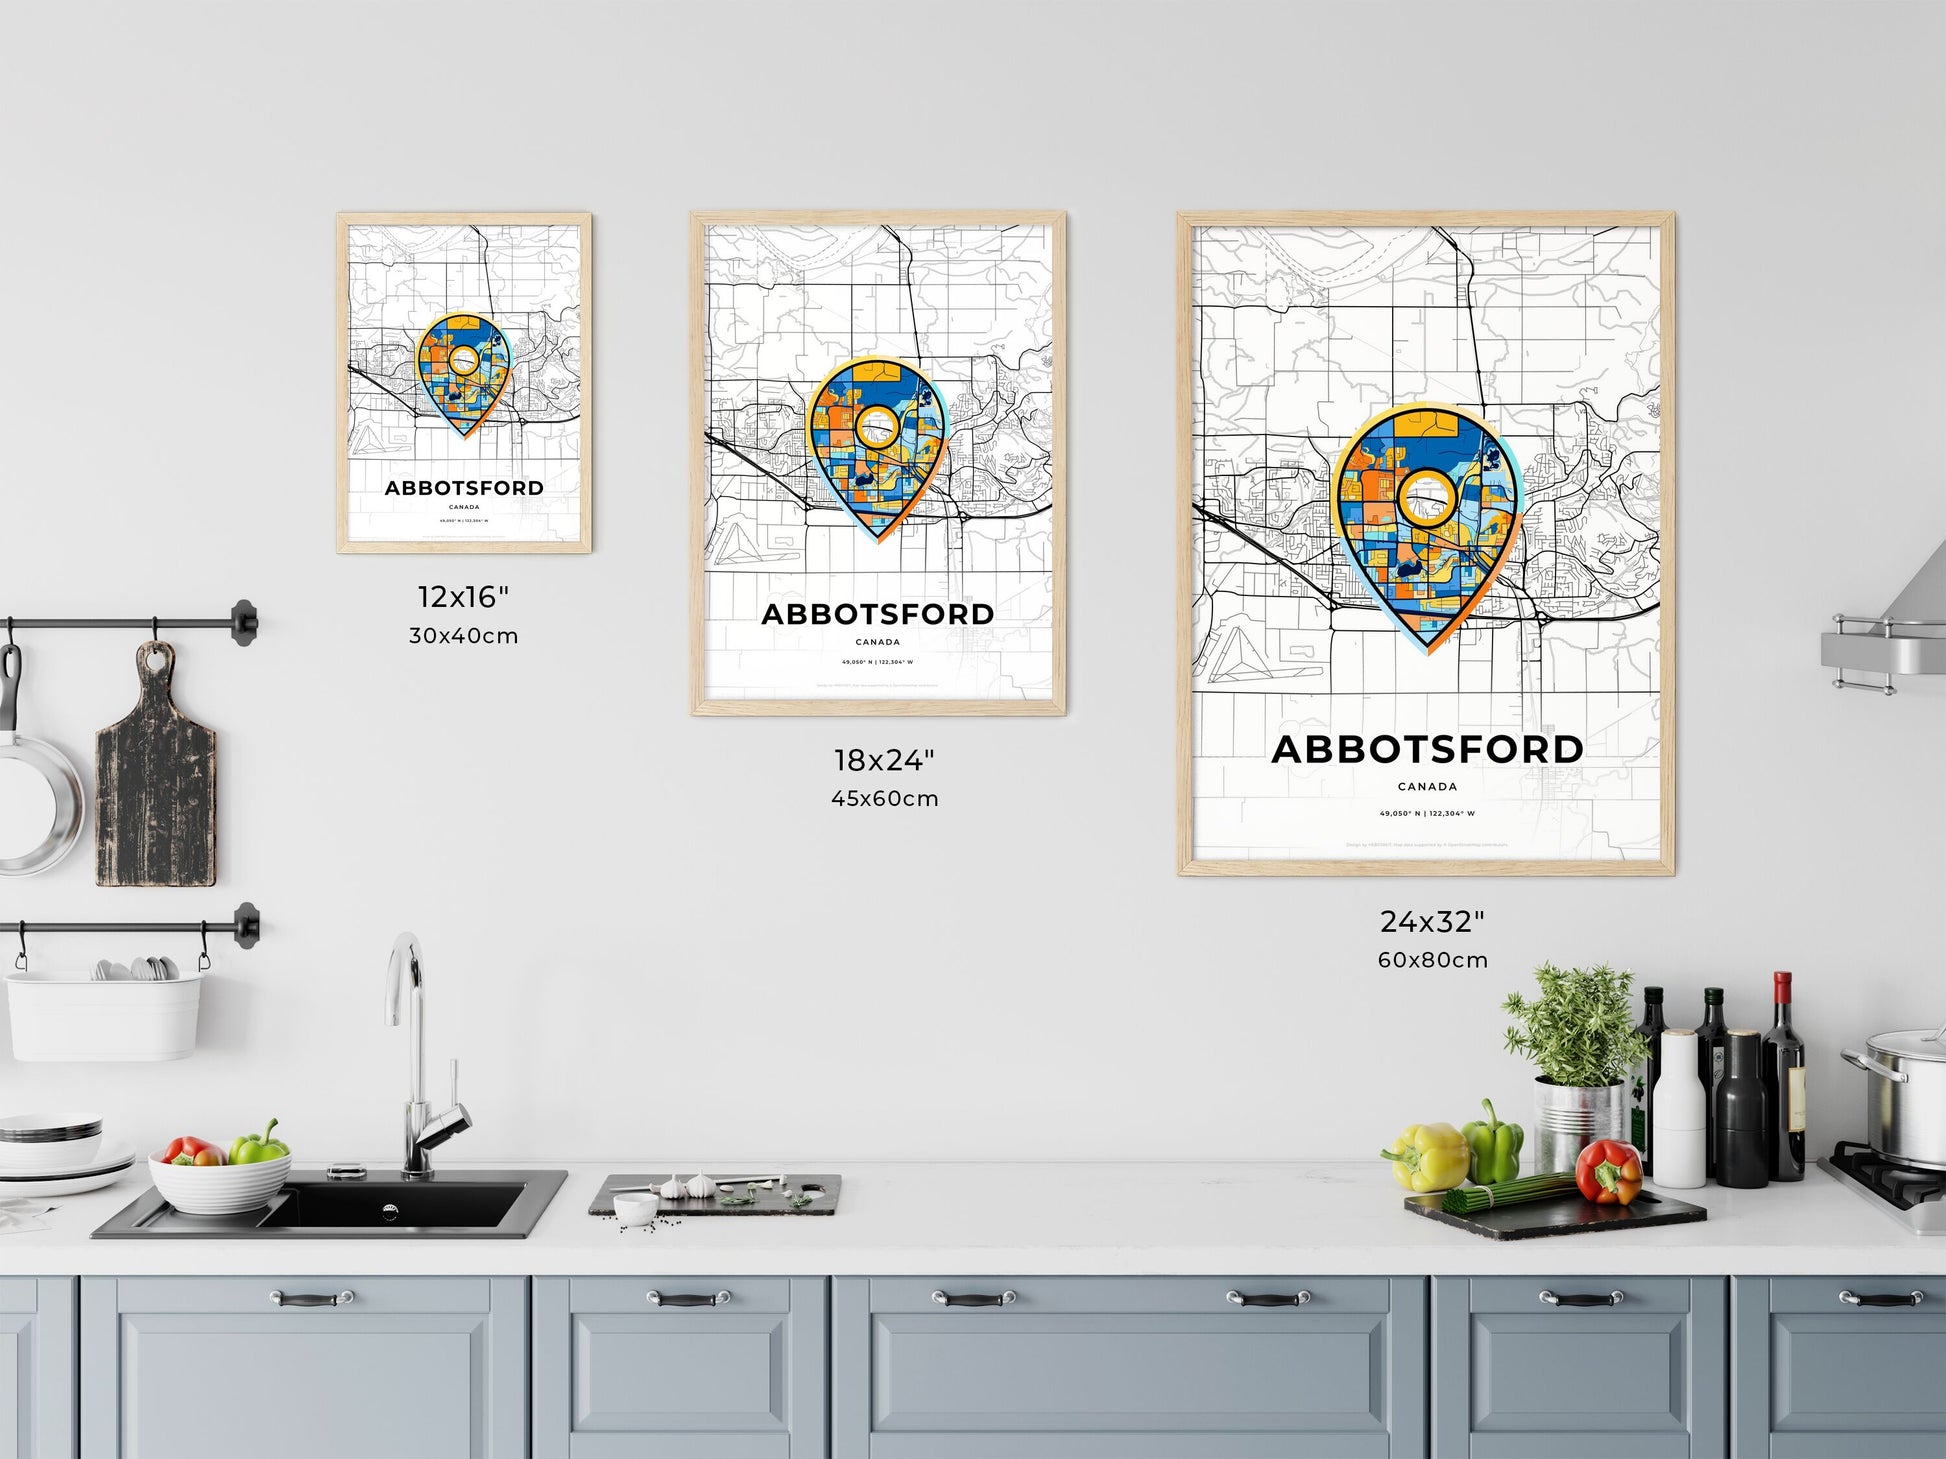 ABBOTSFORD CANADA minimal art map with a colorful icon. Where it all began, Couple map gift.